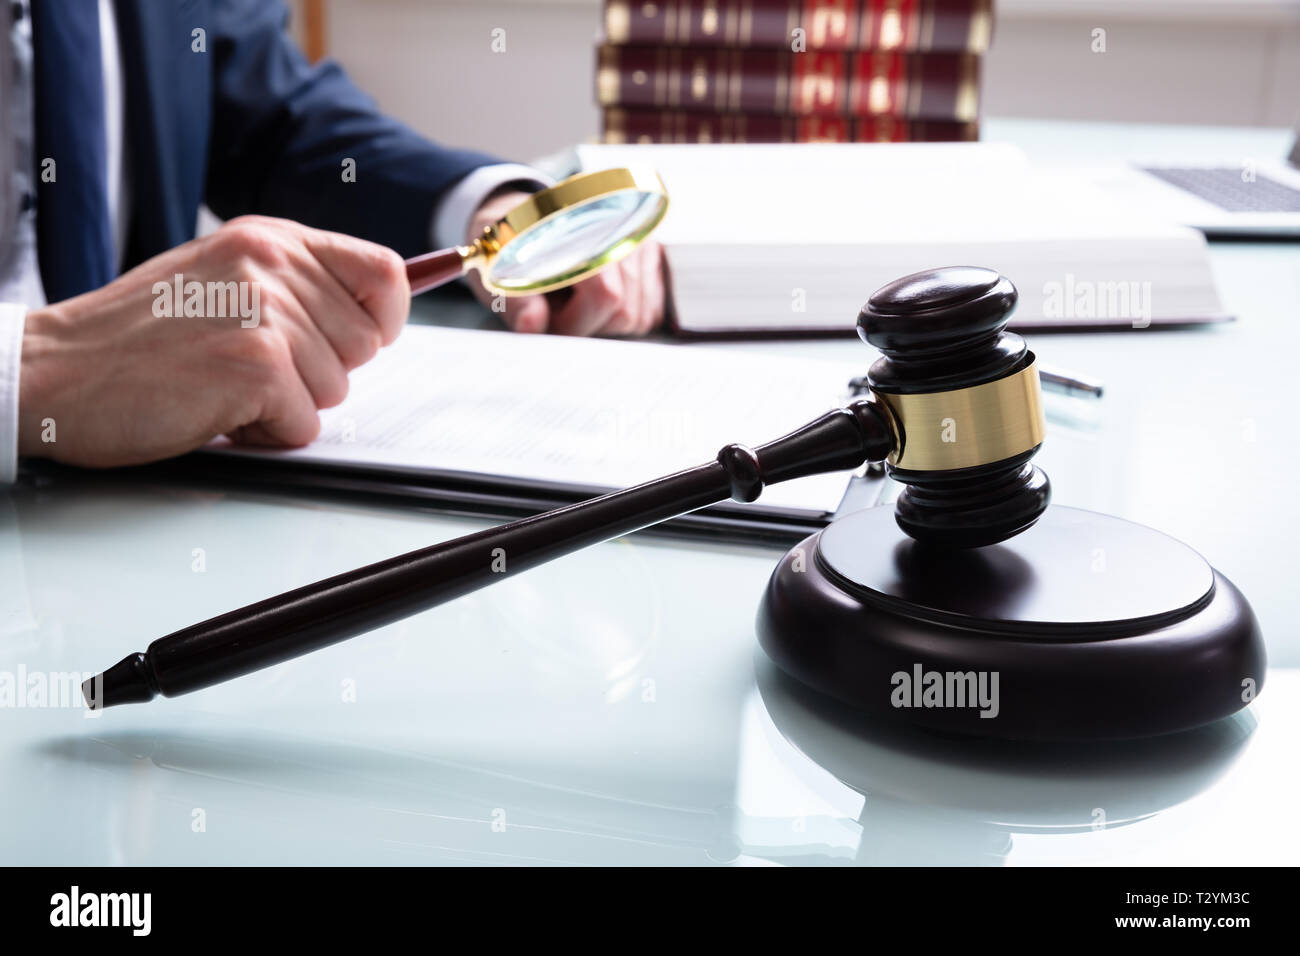 Male Justice Working On Legal Documents With Gavel In The Courtroom Stock Photo